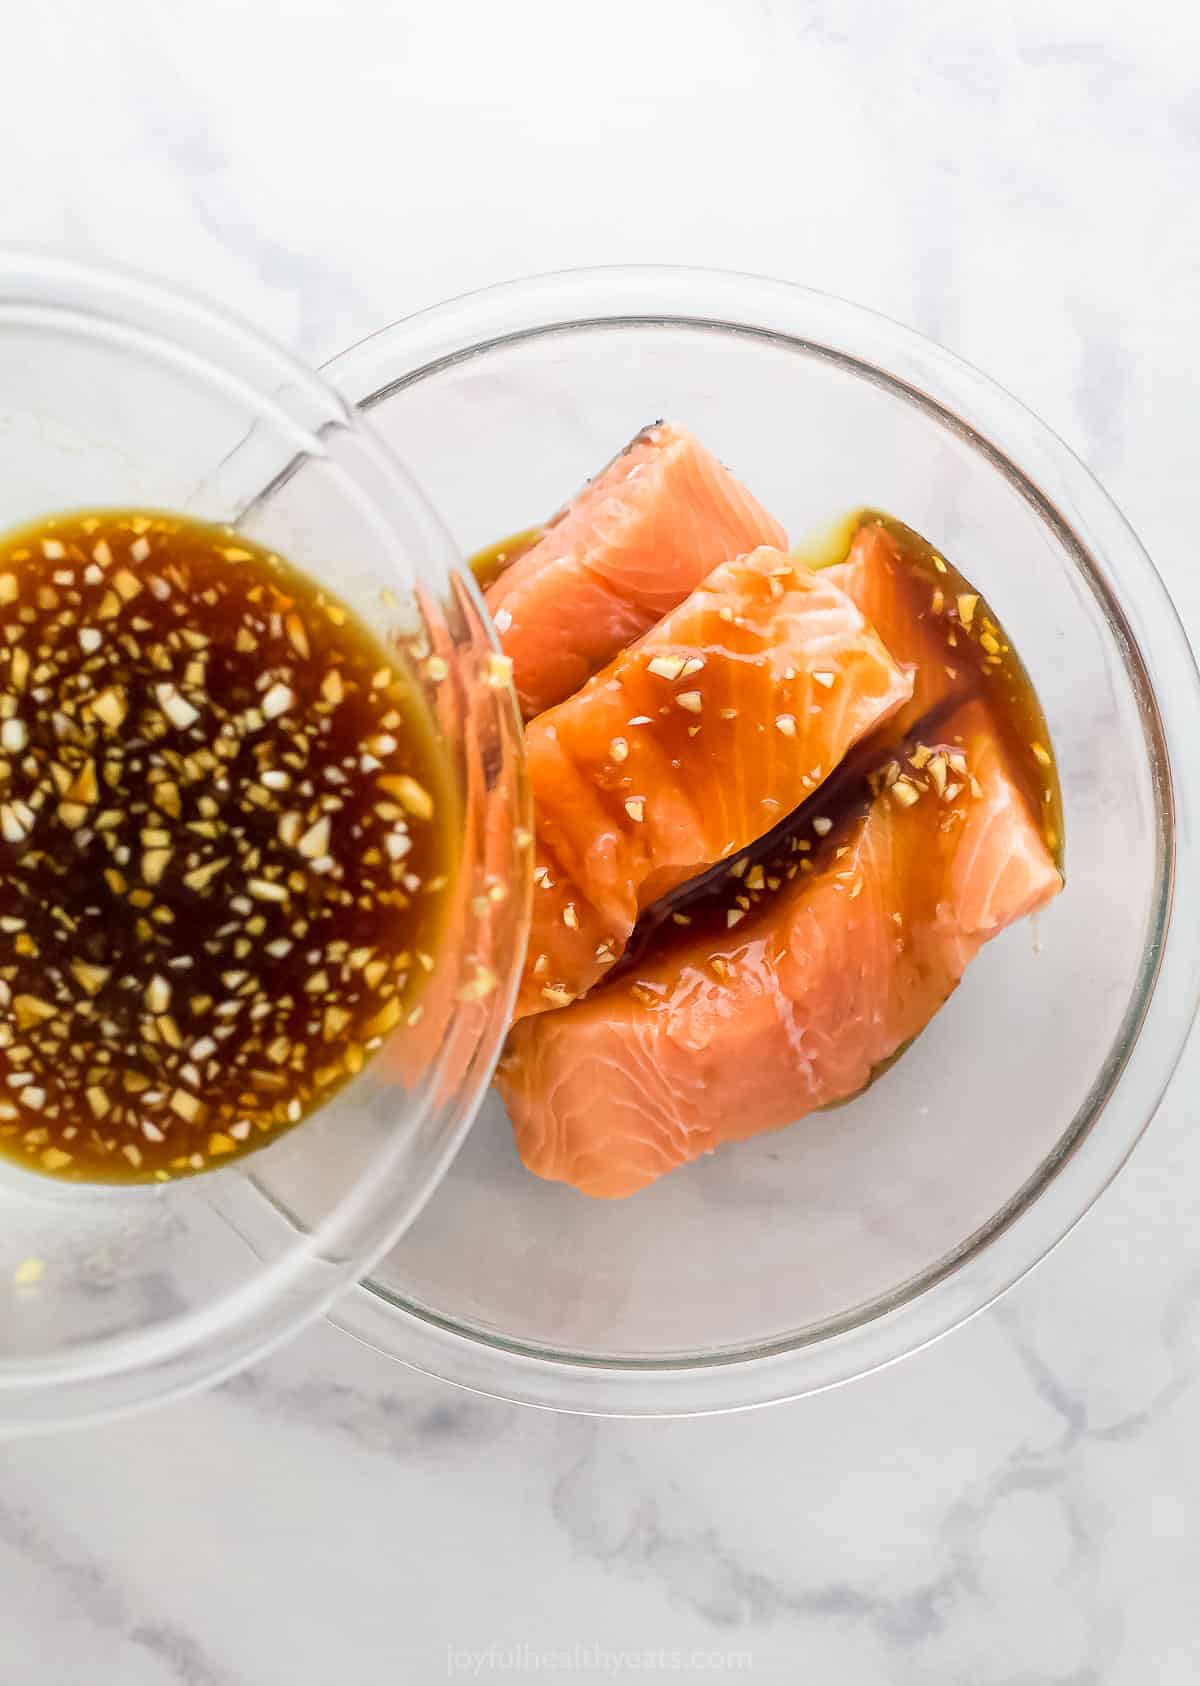 Pour marinade over fresh salmon in bowl. 